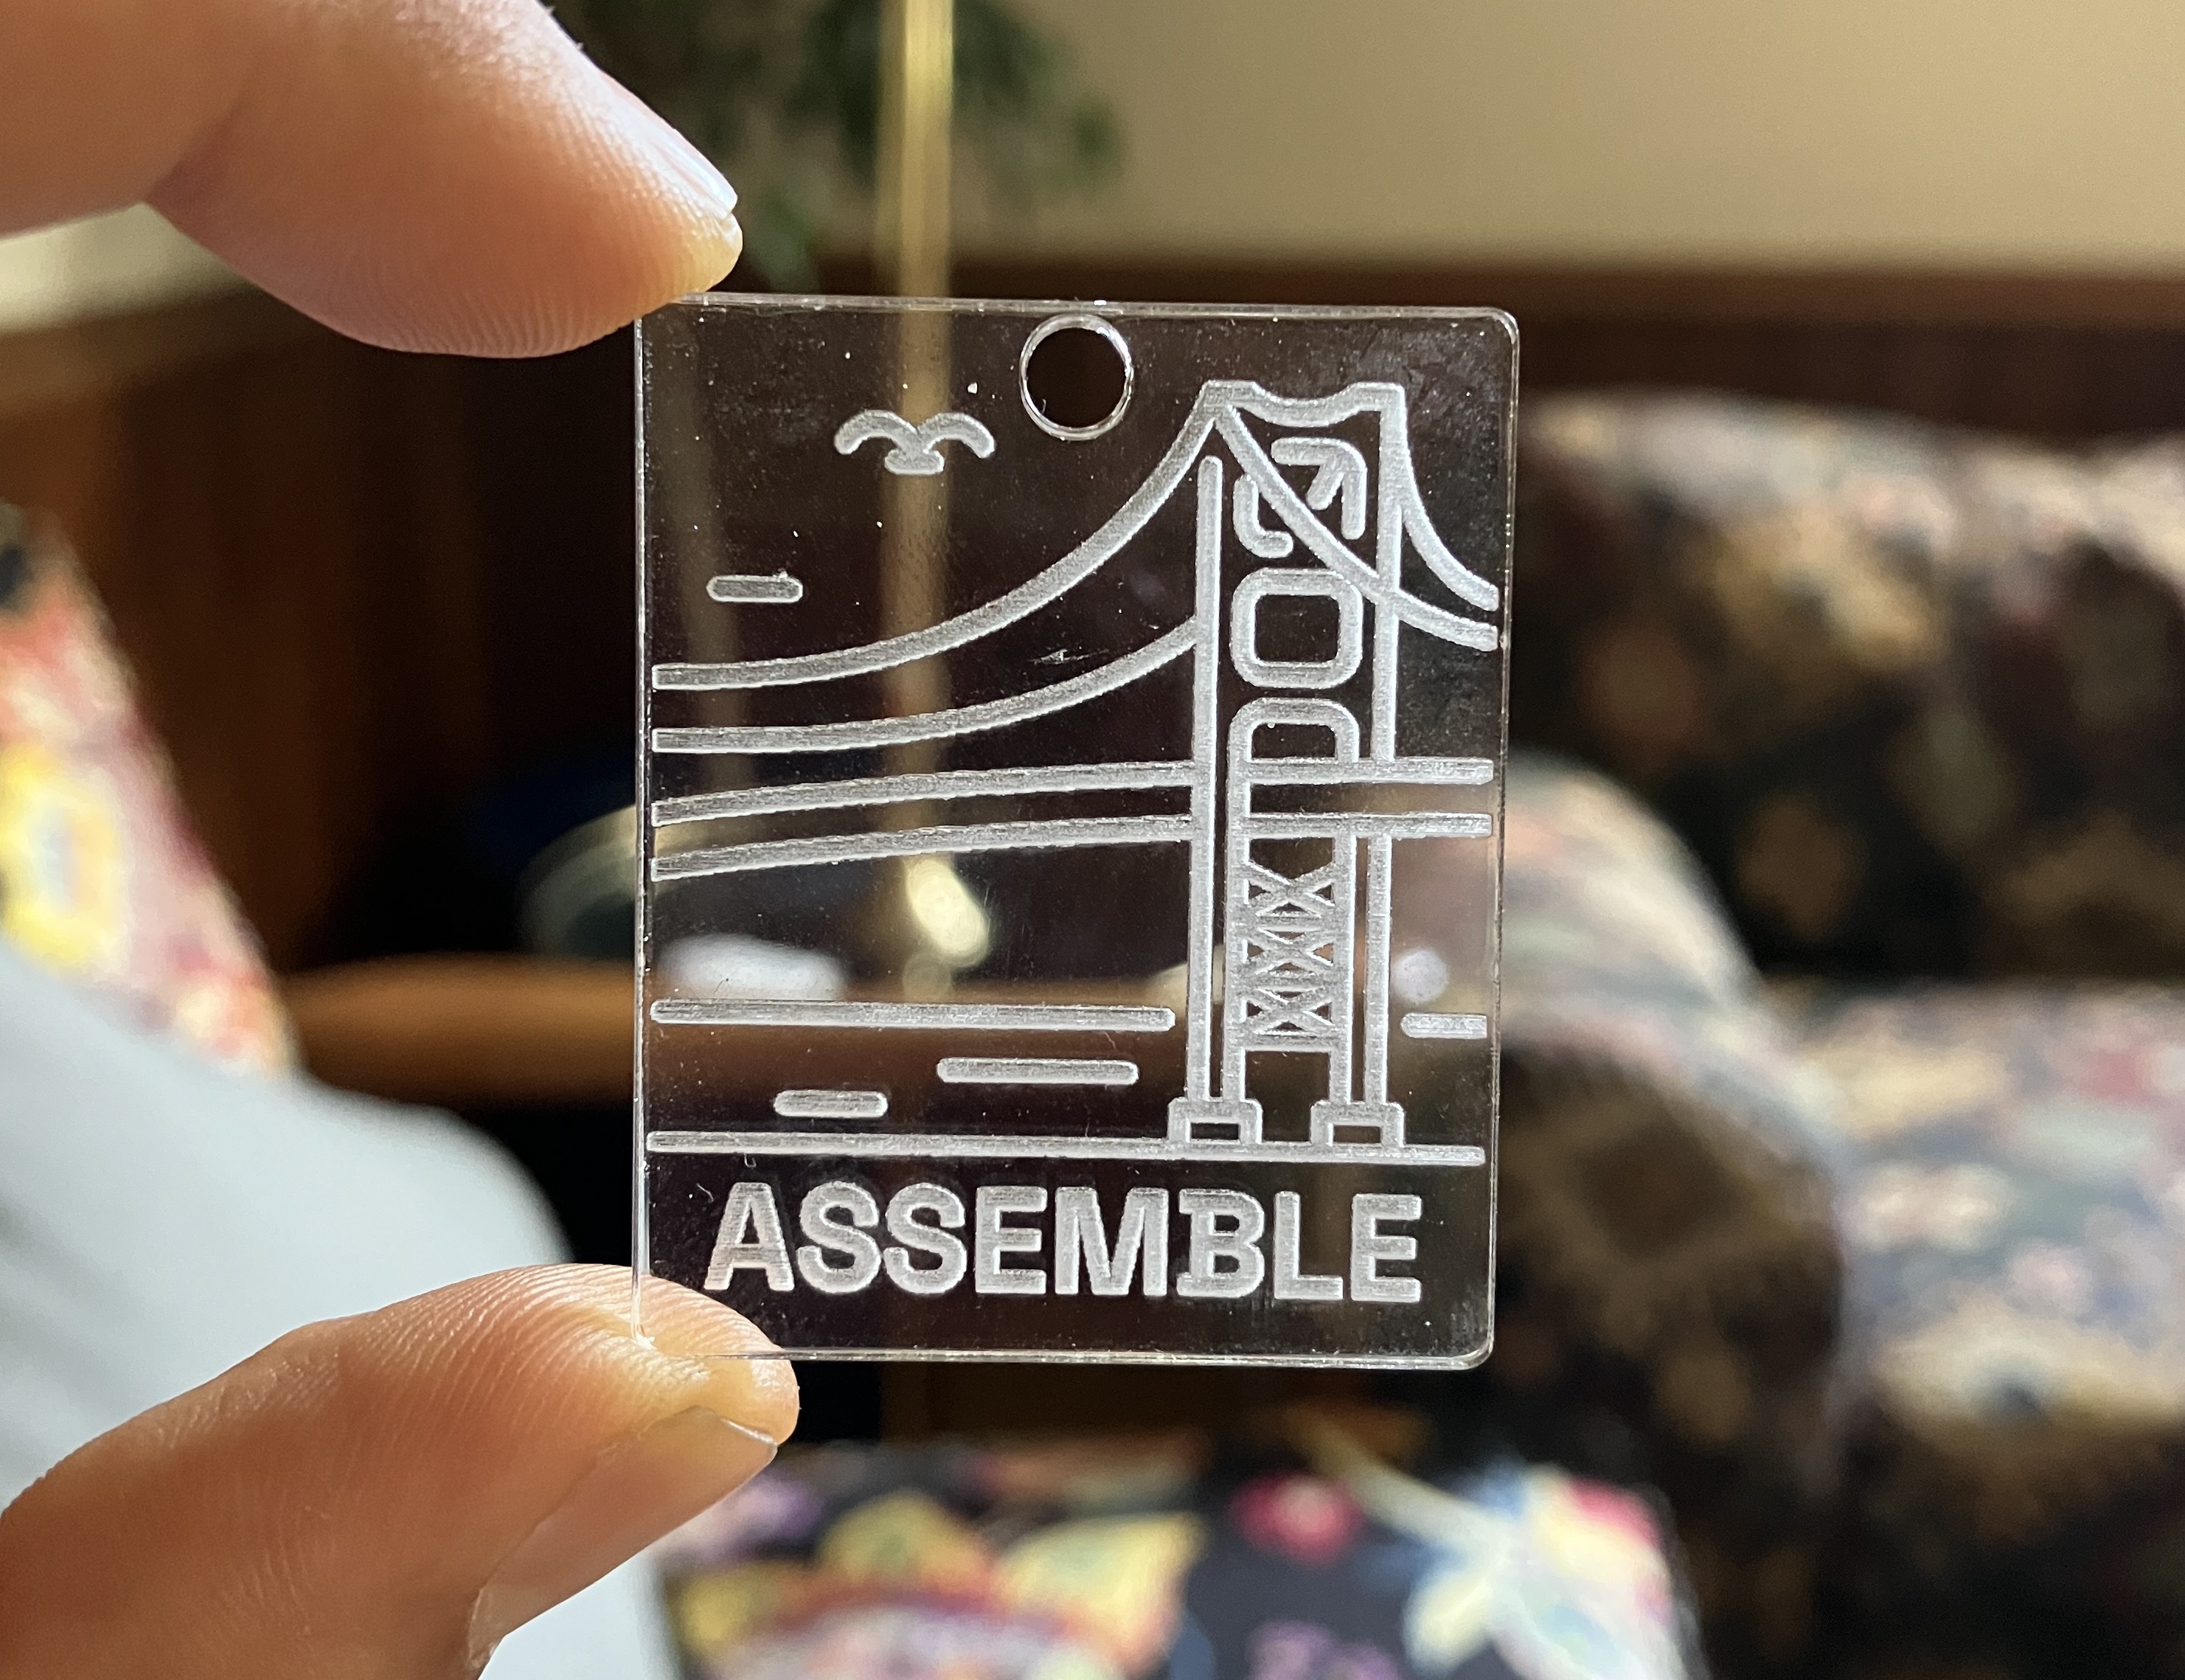 Translucent rectangular piece engraved with the Assemble logo, held in between two fingers.